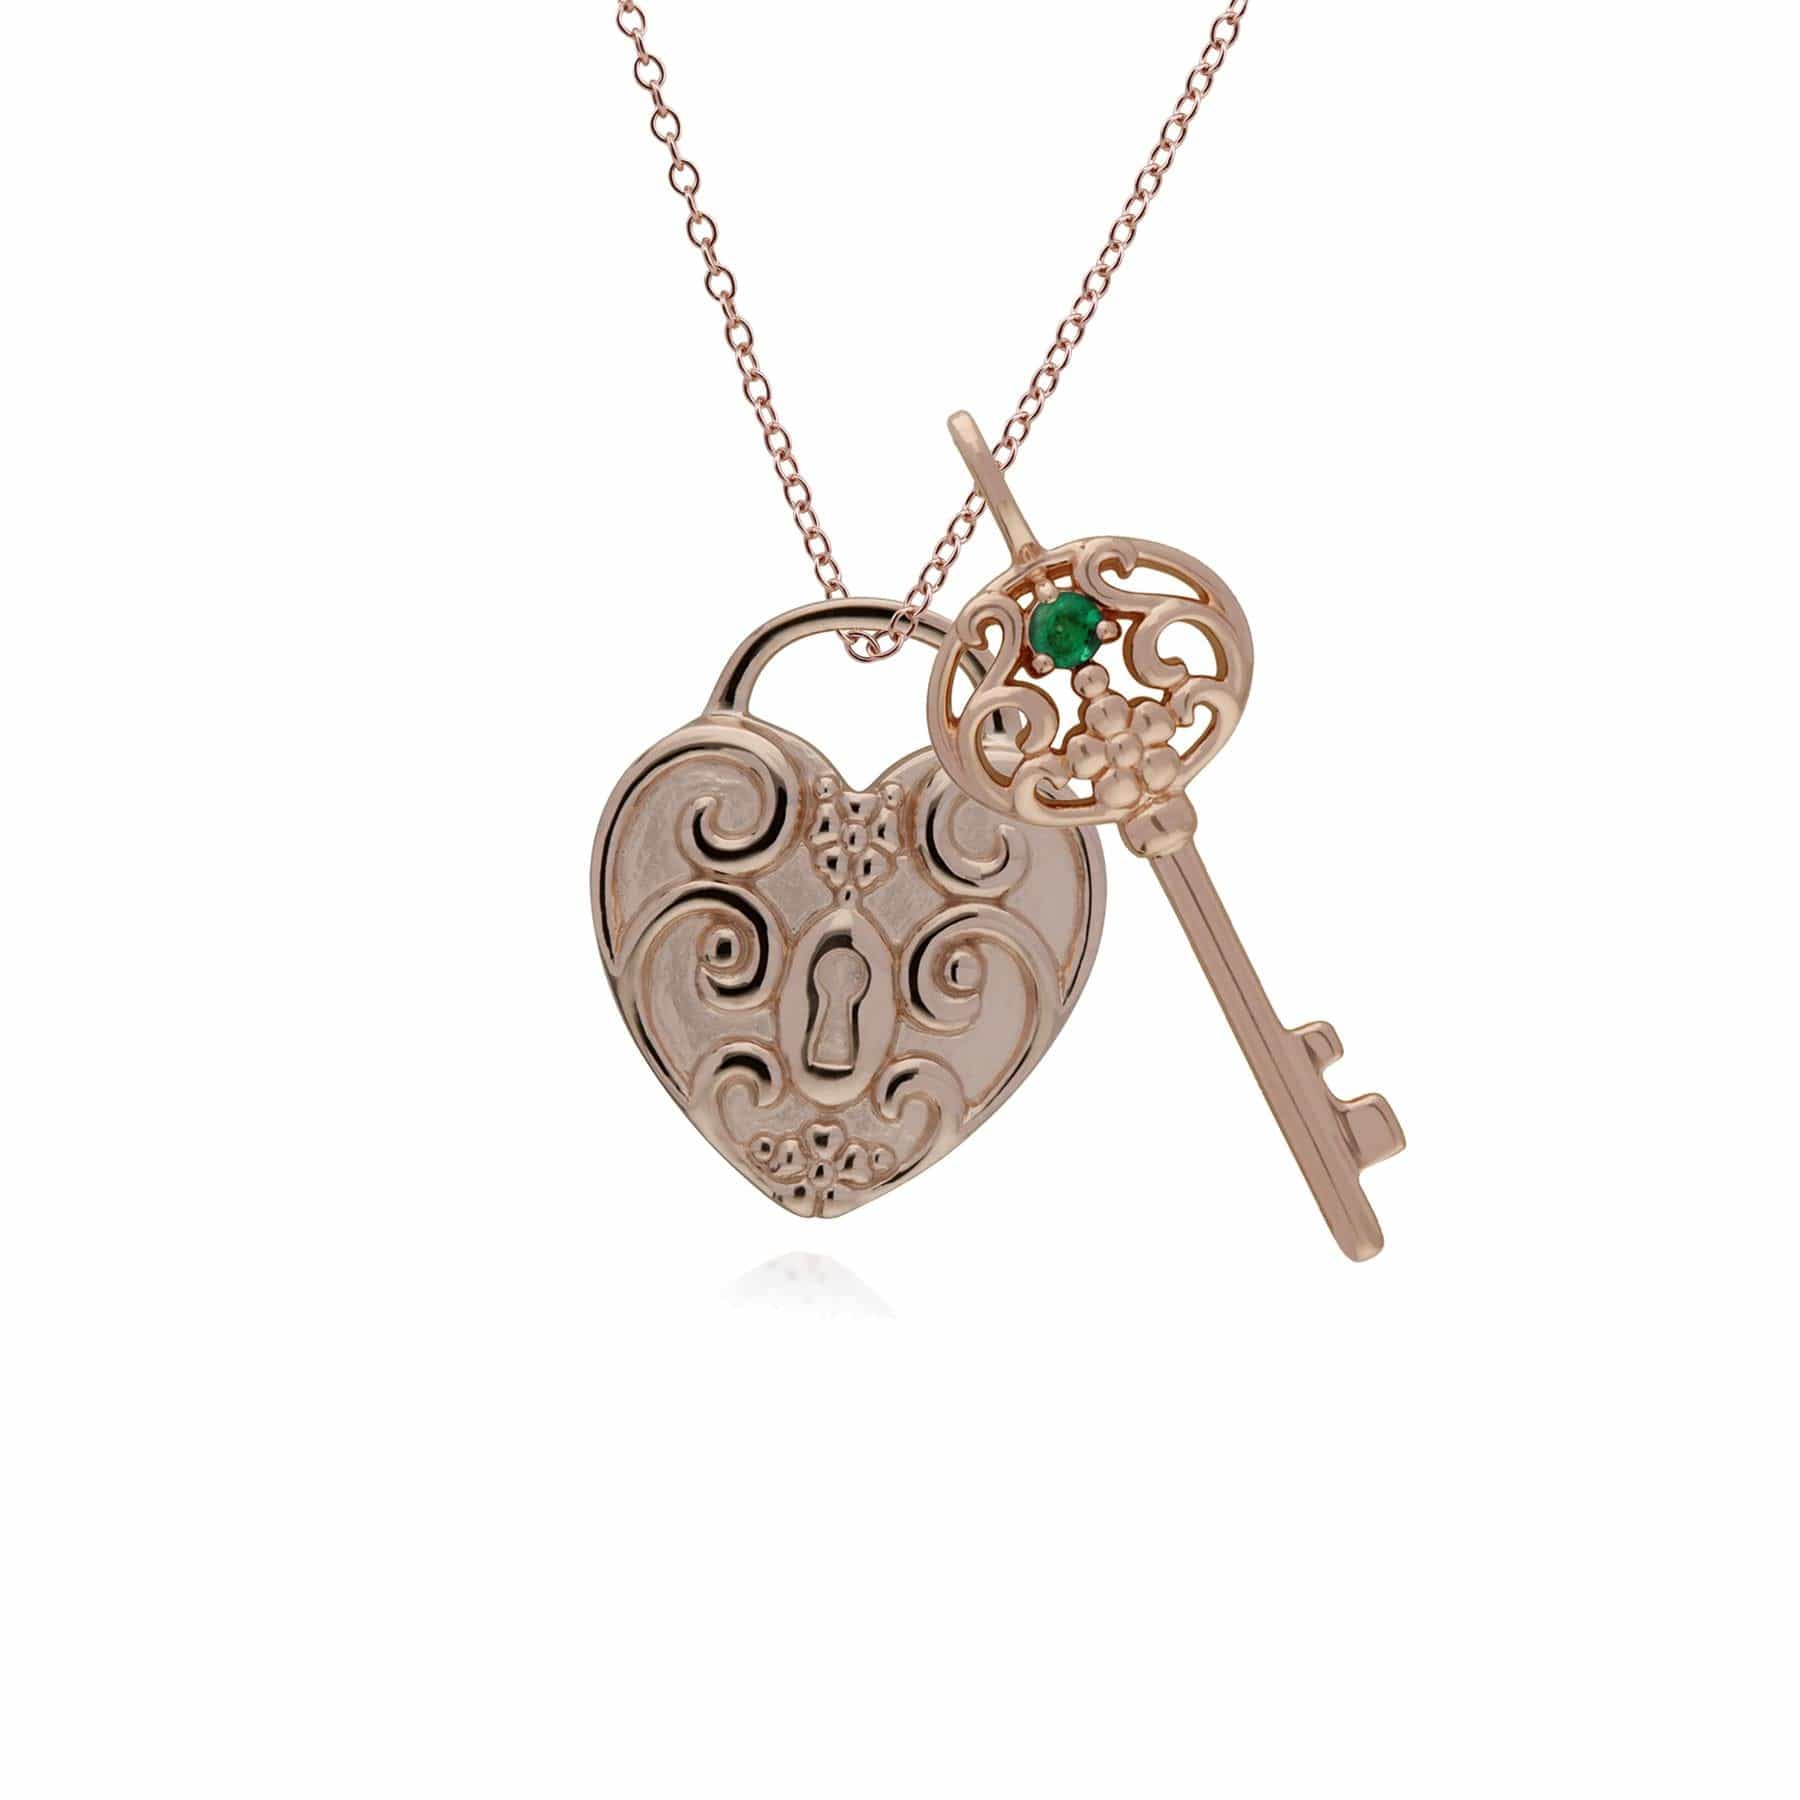 270P026704925-270P026501925 Classic Swirl Heart Lock Pendant & Emerald Big Key Charm in Rose Gold Plated 925 Sterling Silver 1